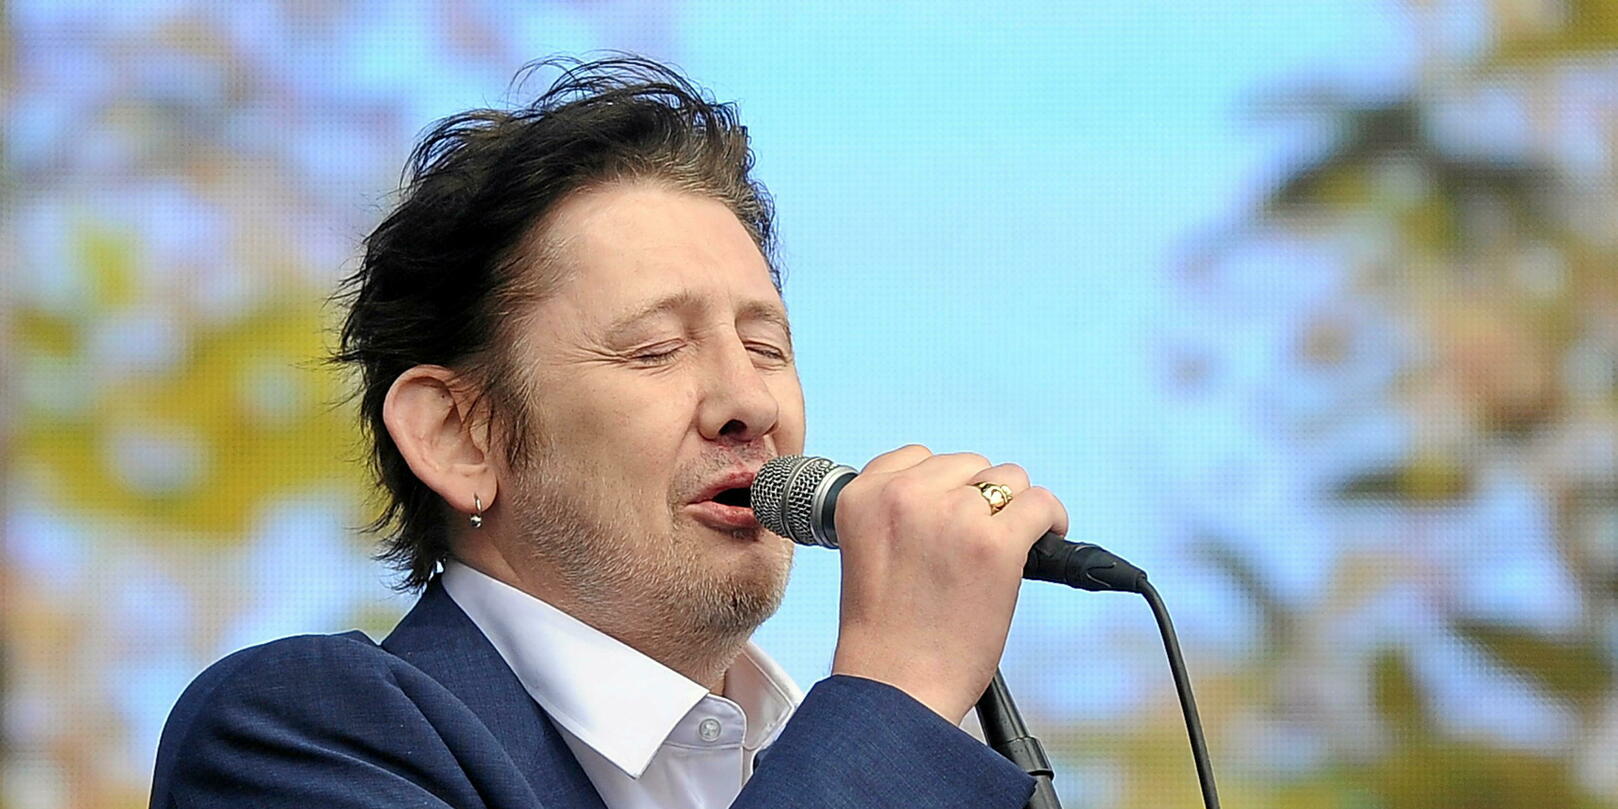 Shane MacGowan, lead singer of The Pogues, has died